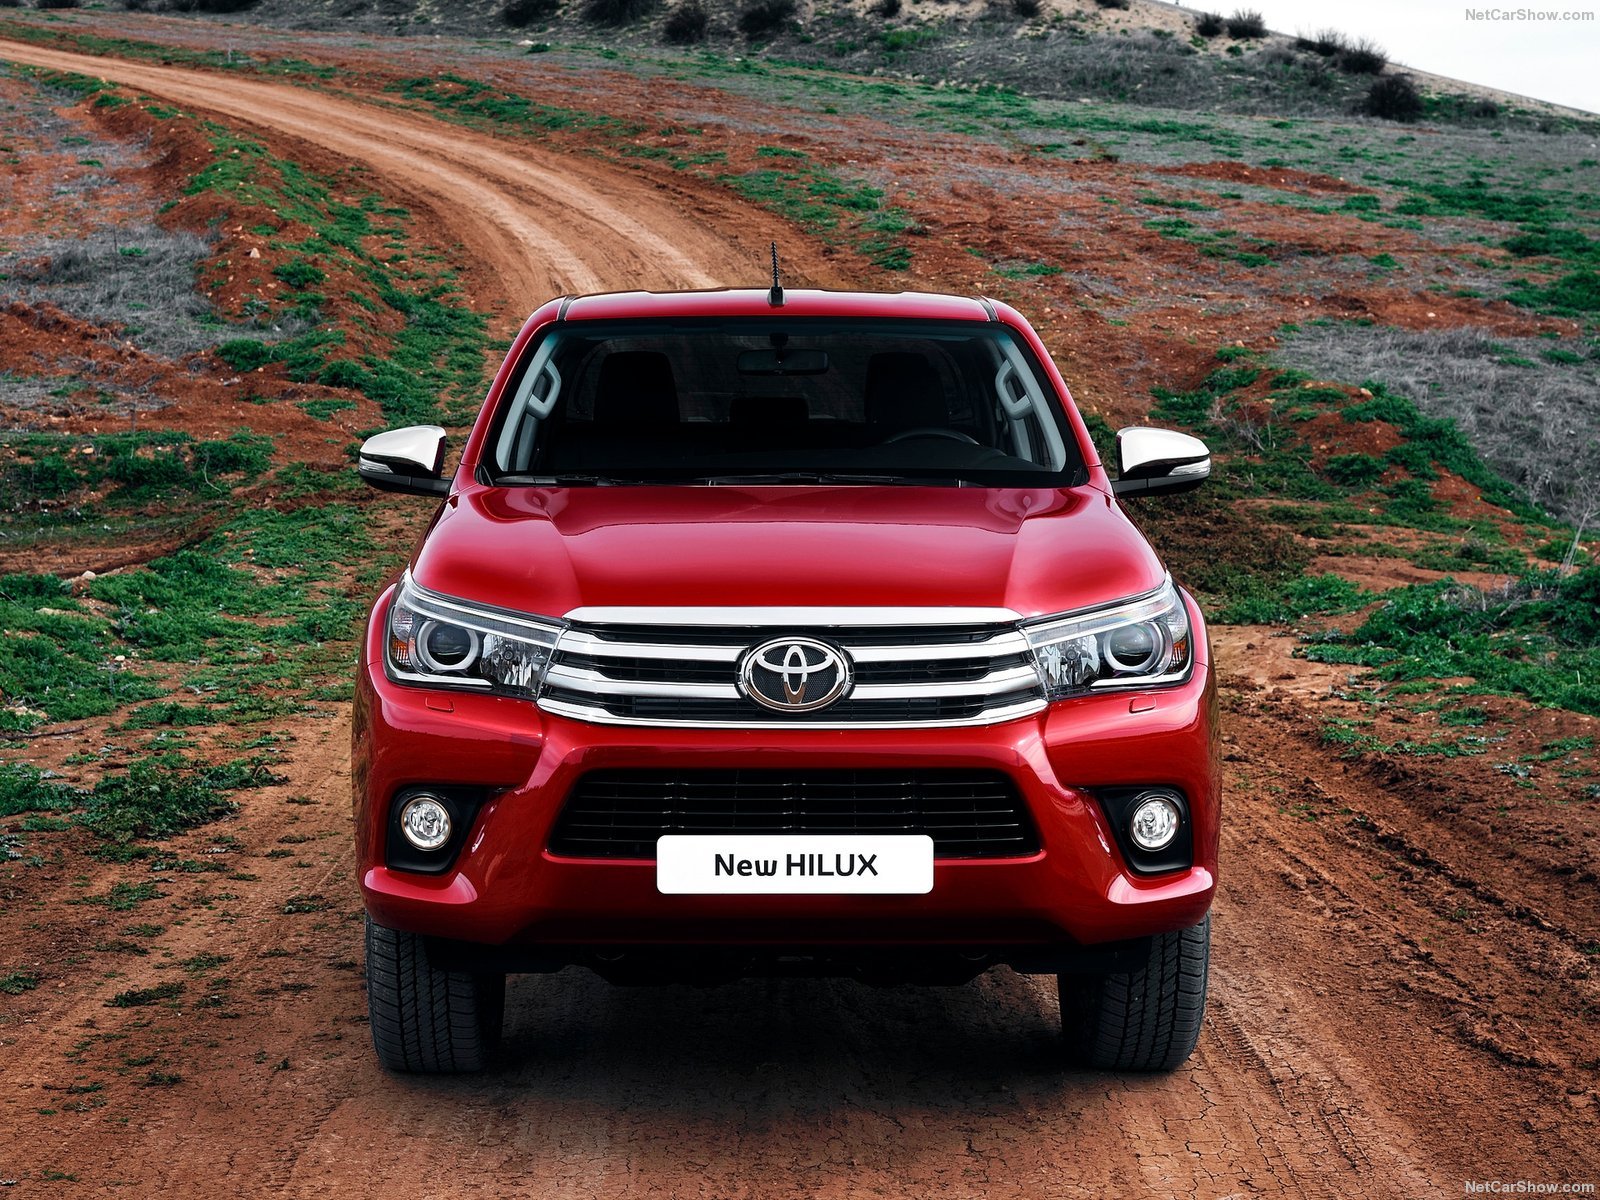 2016, 4x4, Red, Cars, Hilux, Pickup, Toyota Wallpaper